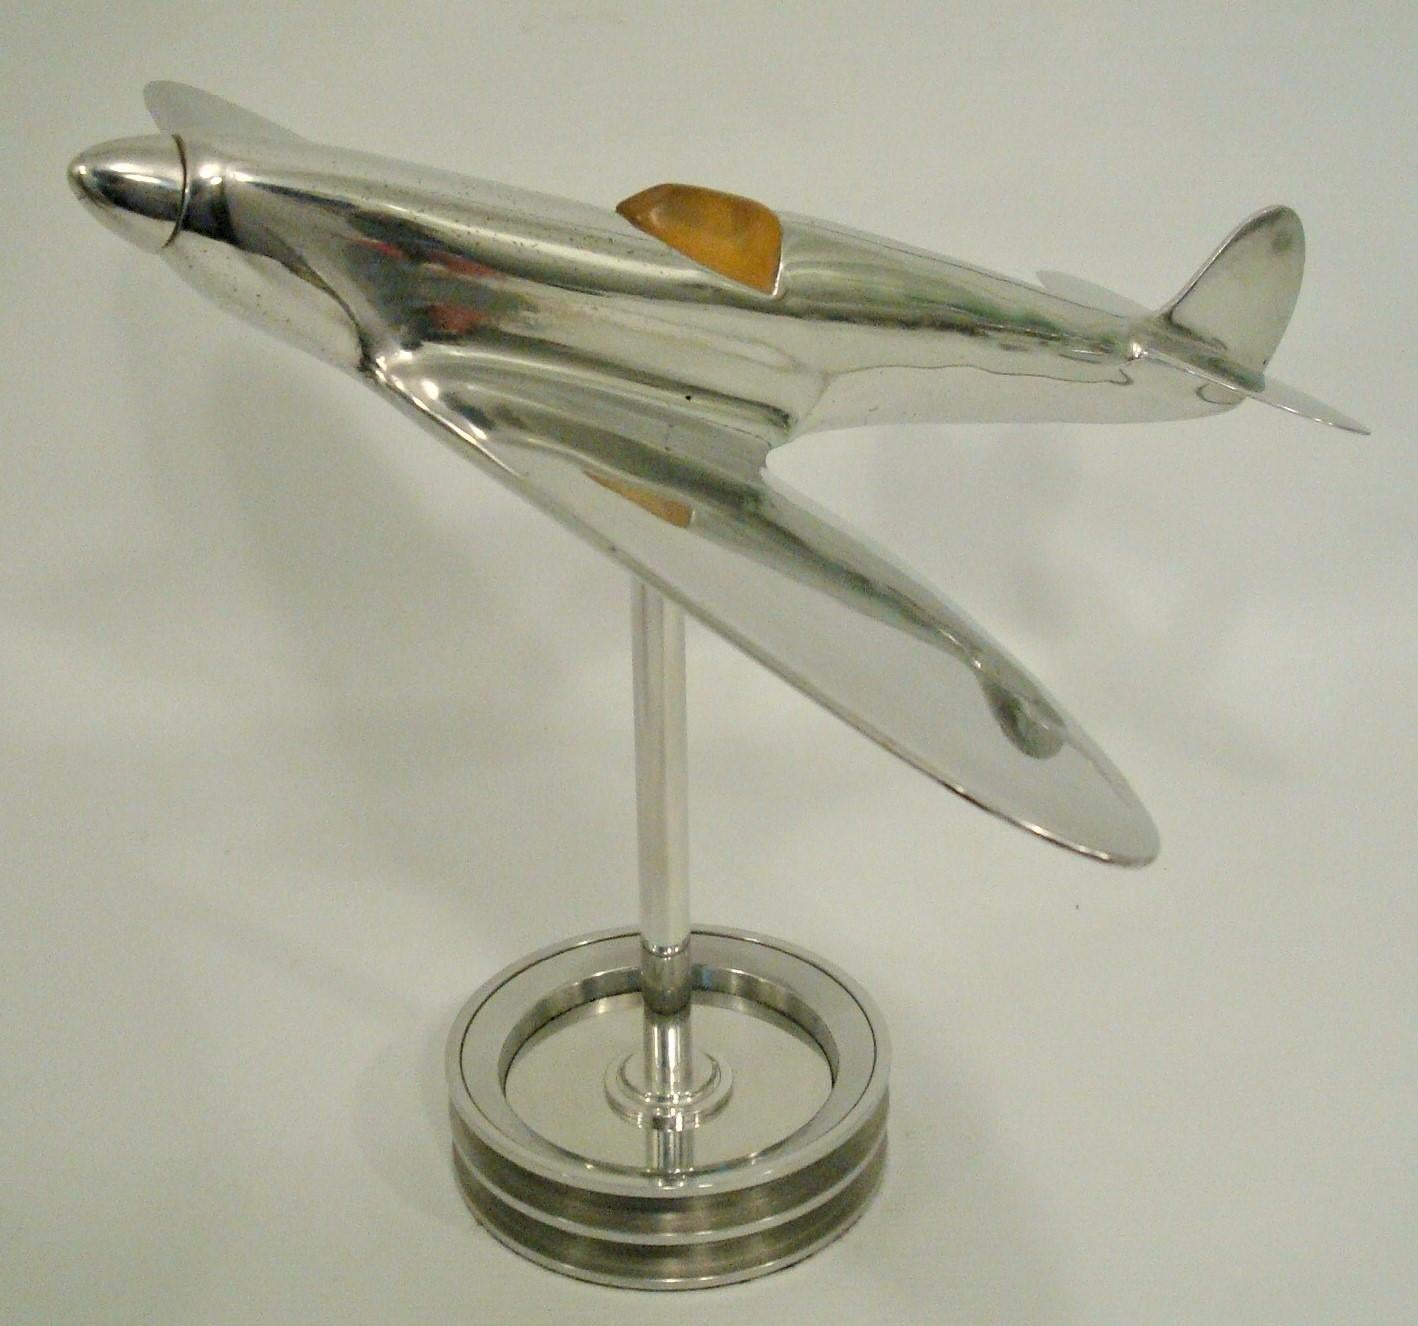 Supermarine Spitfire Airplane Model, desk / counters / sculpture.
Made in United Kindom 1930´s. Perfect Gift for any pilot or aviation fan.

The Supermarine Spitfire is a British single-seat fighter aircraft used by the Royal Air Force and other